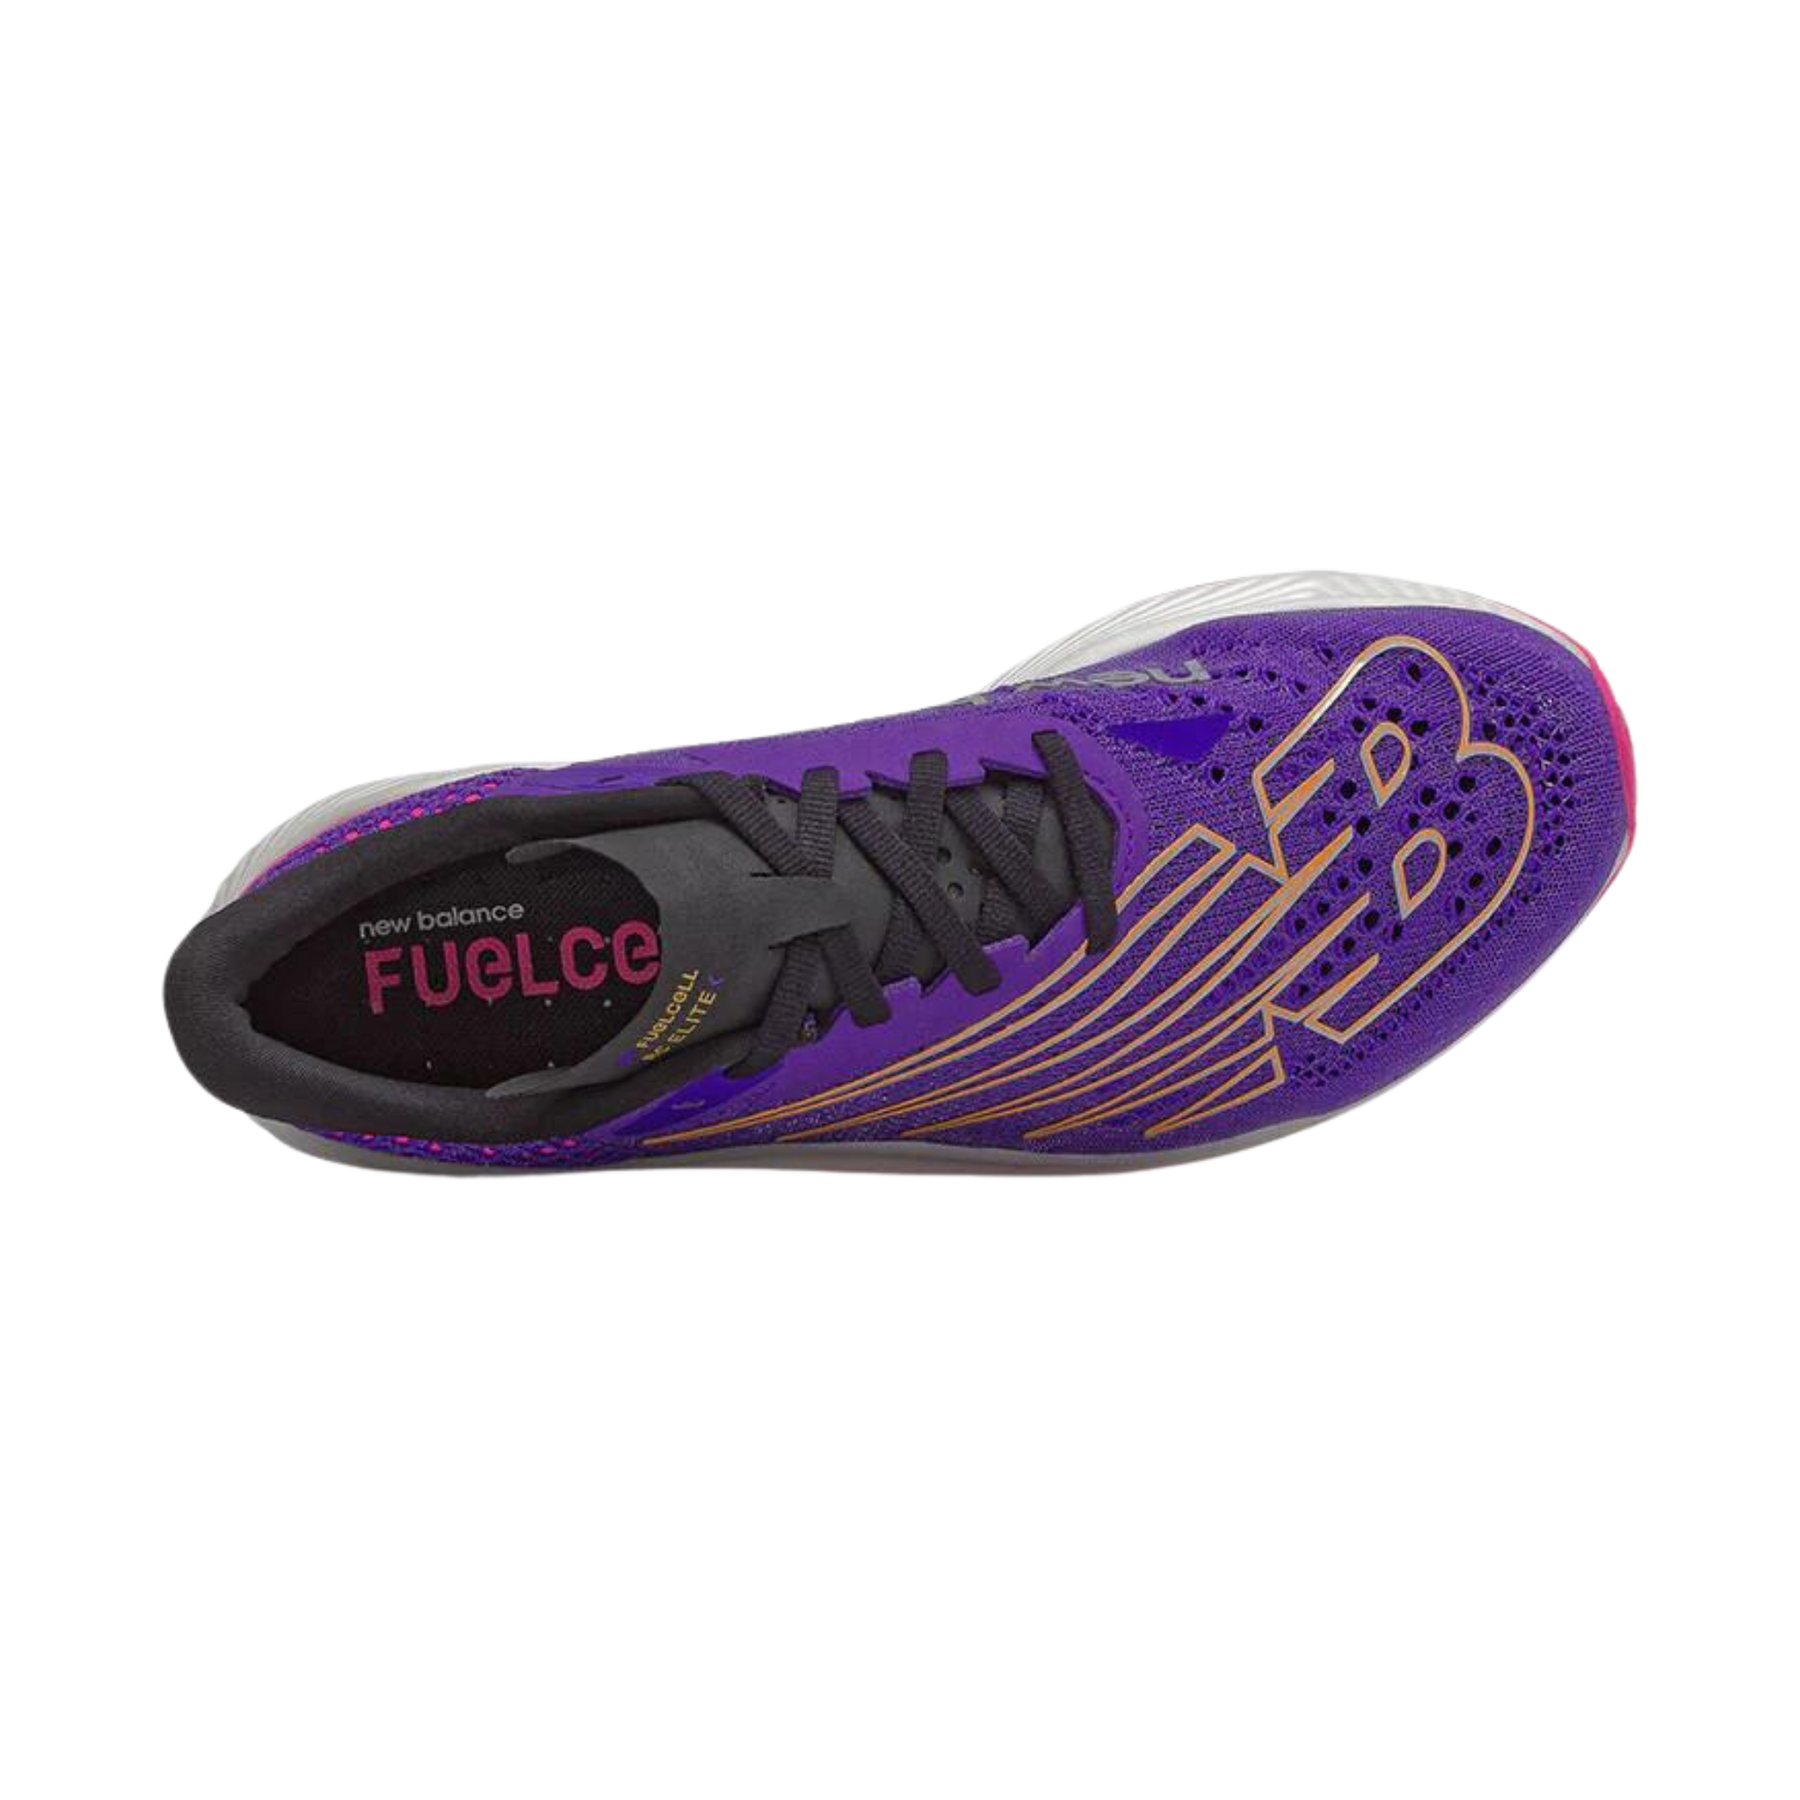 New Balance Women's FuelCell RC Elite v2